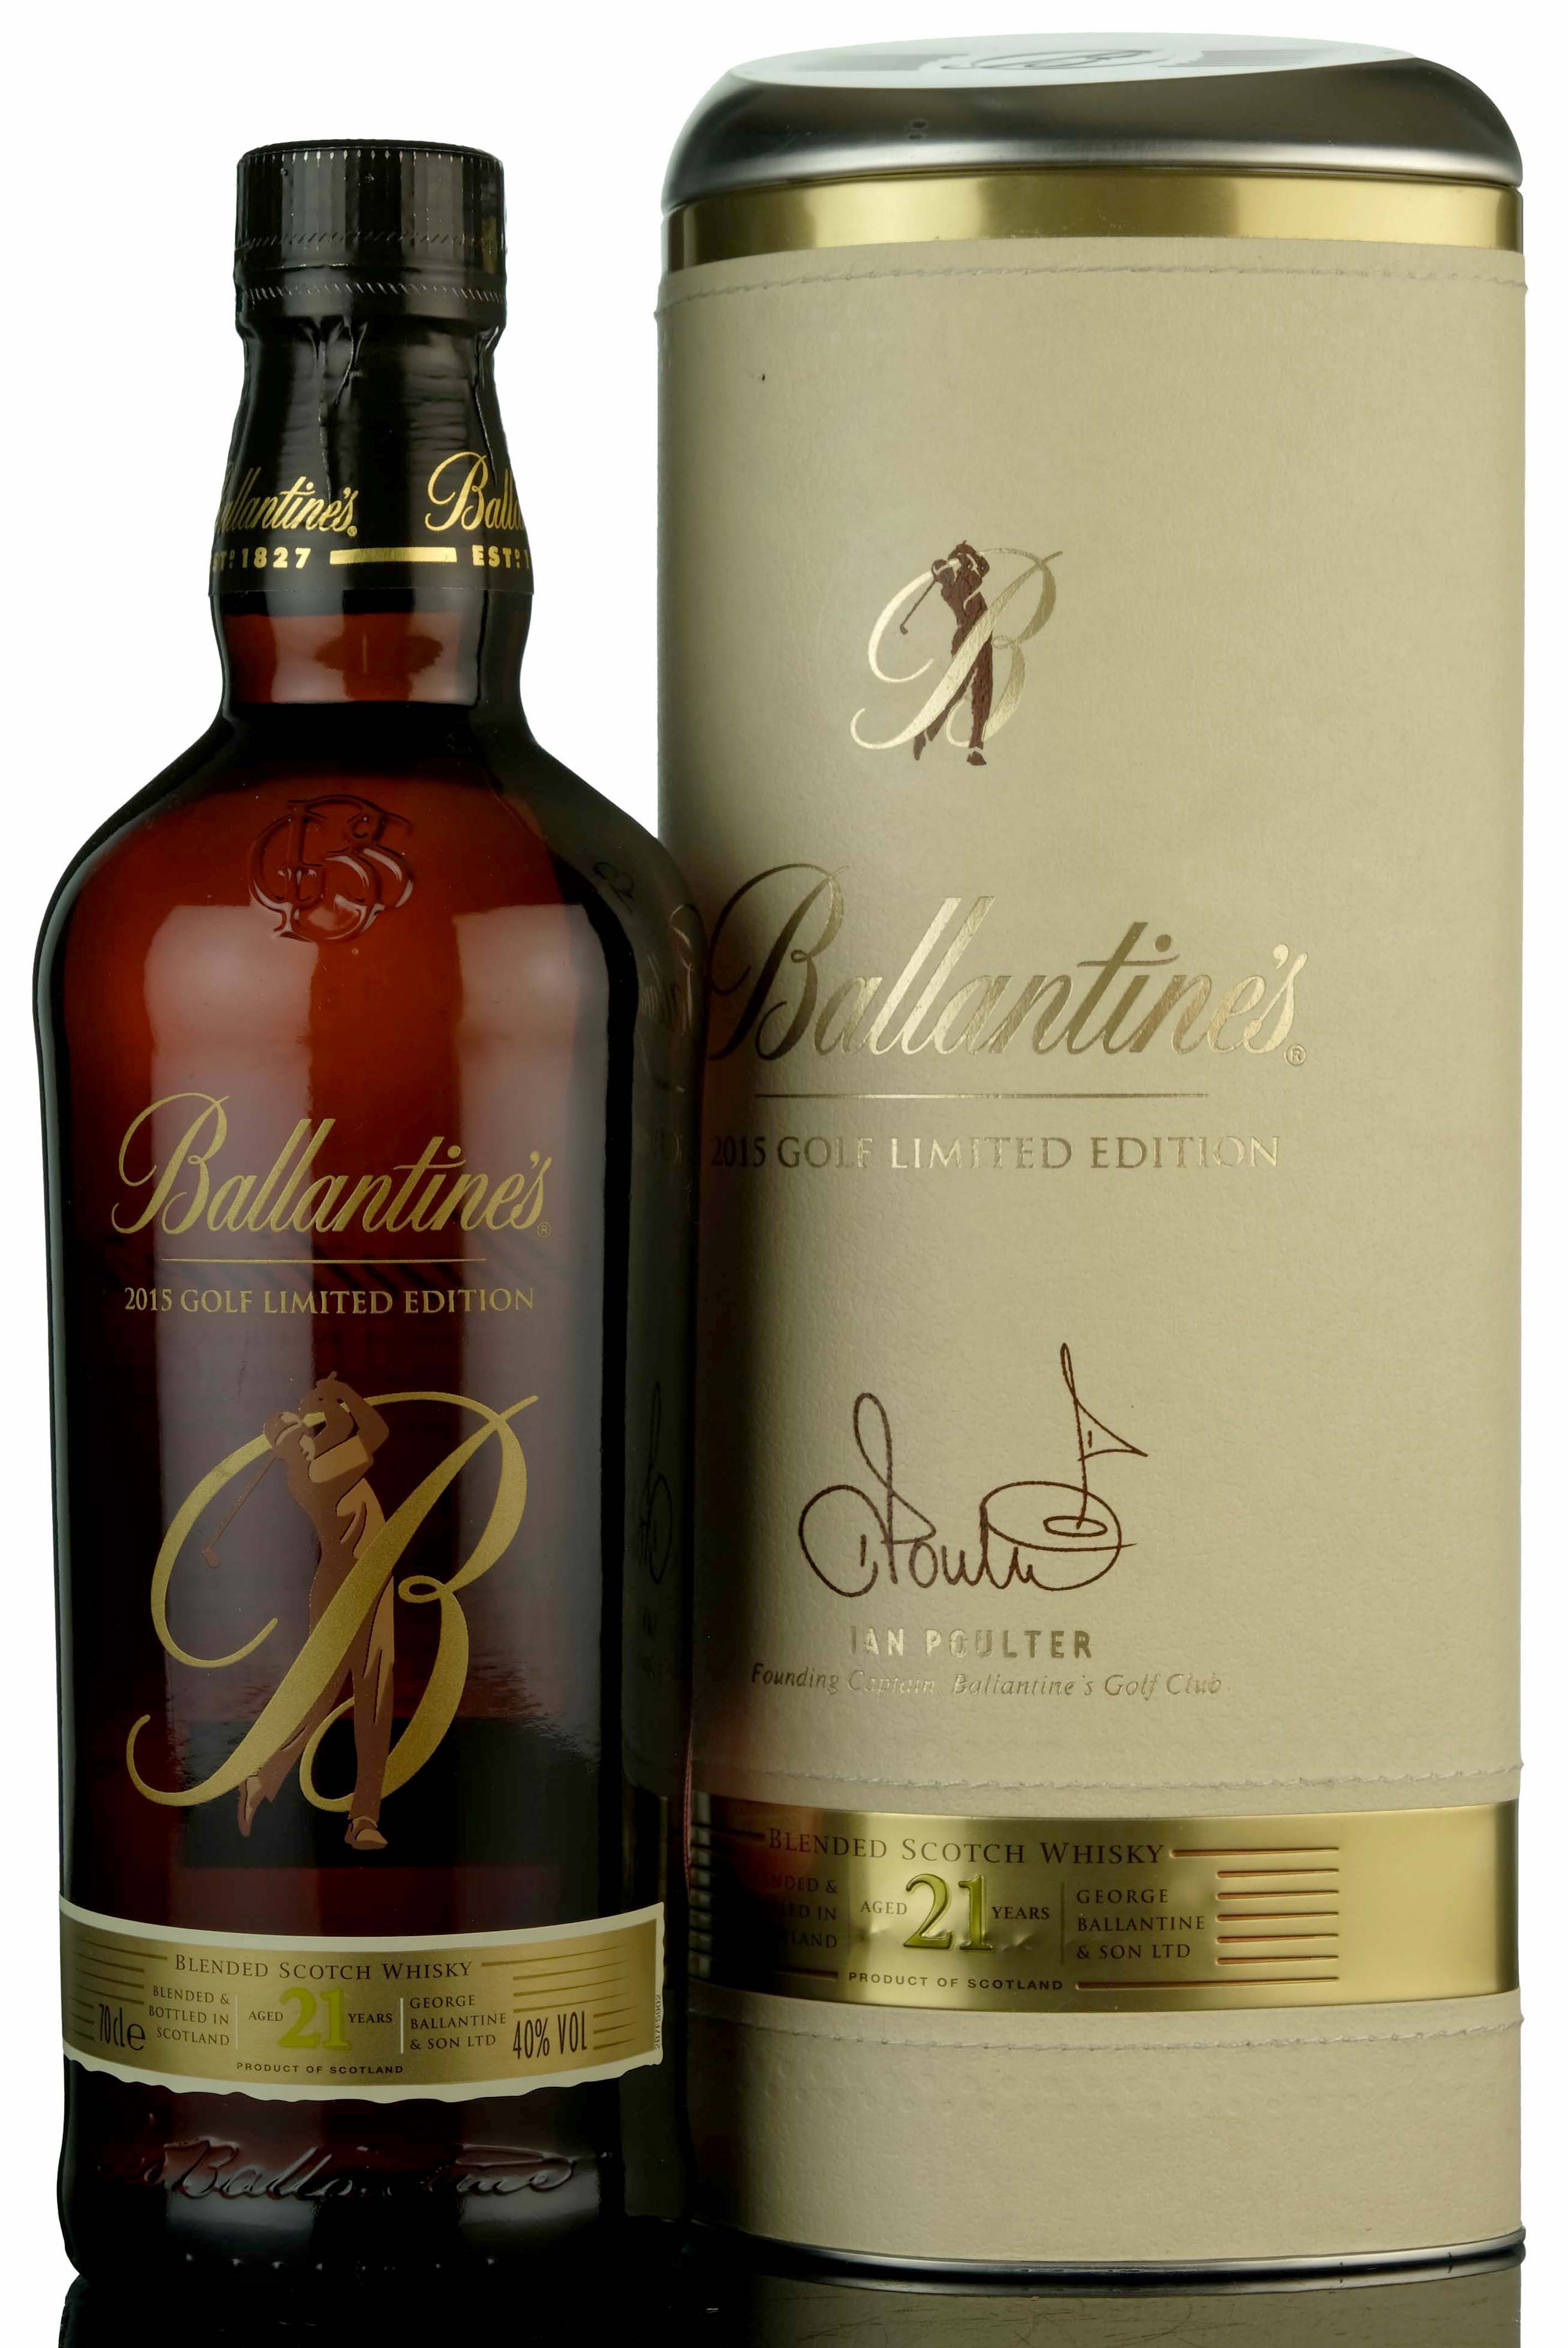 Ballantines 21 Year Old - Ian Poulter 2015 Golf Limited Edition